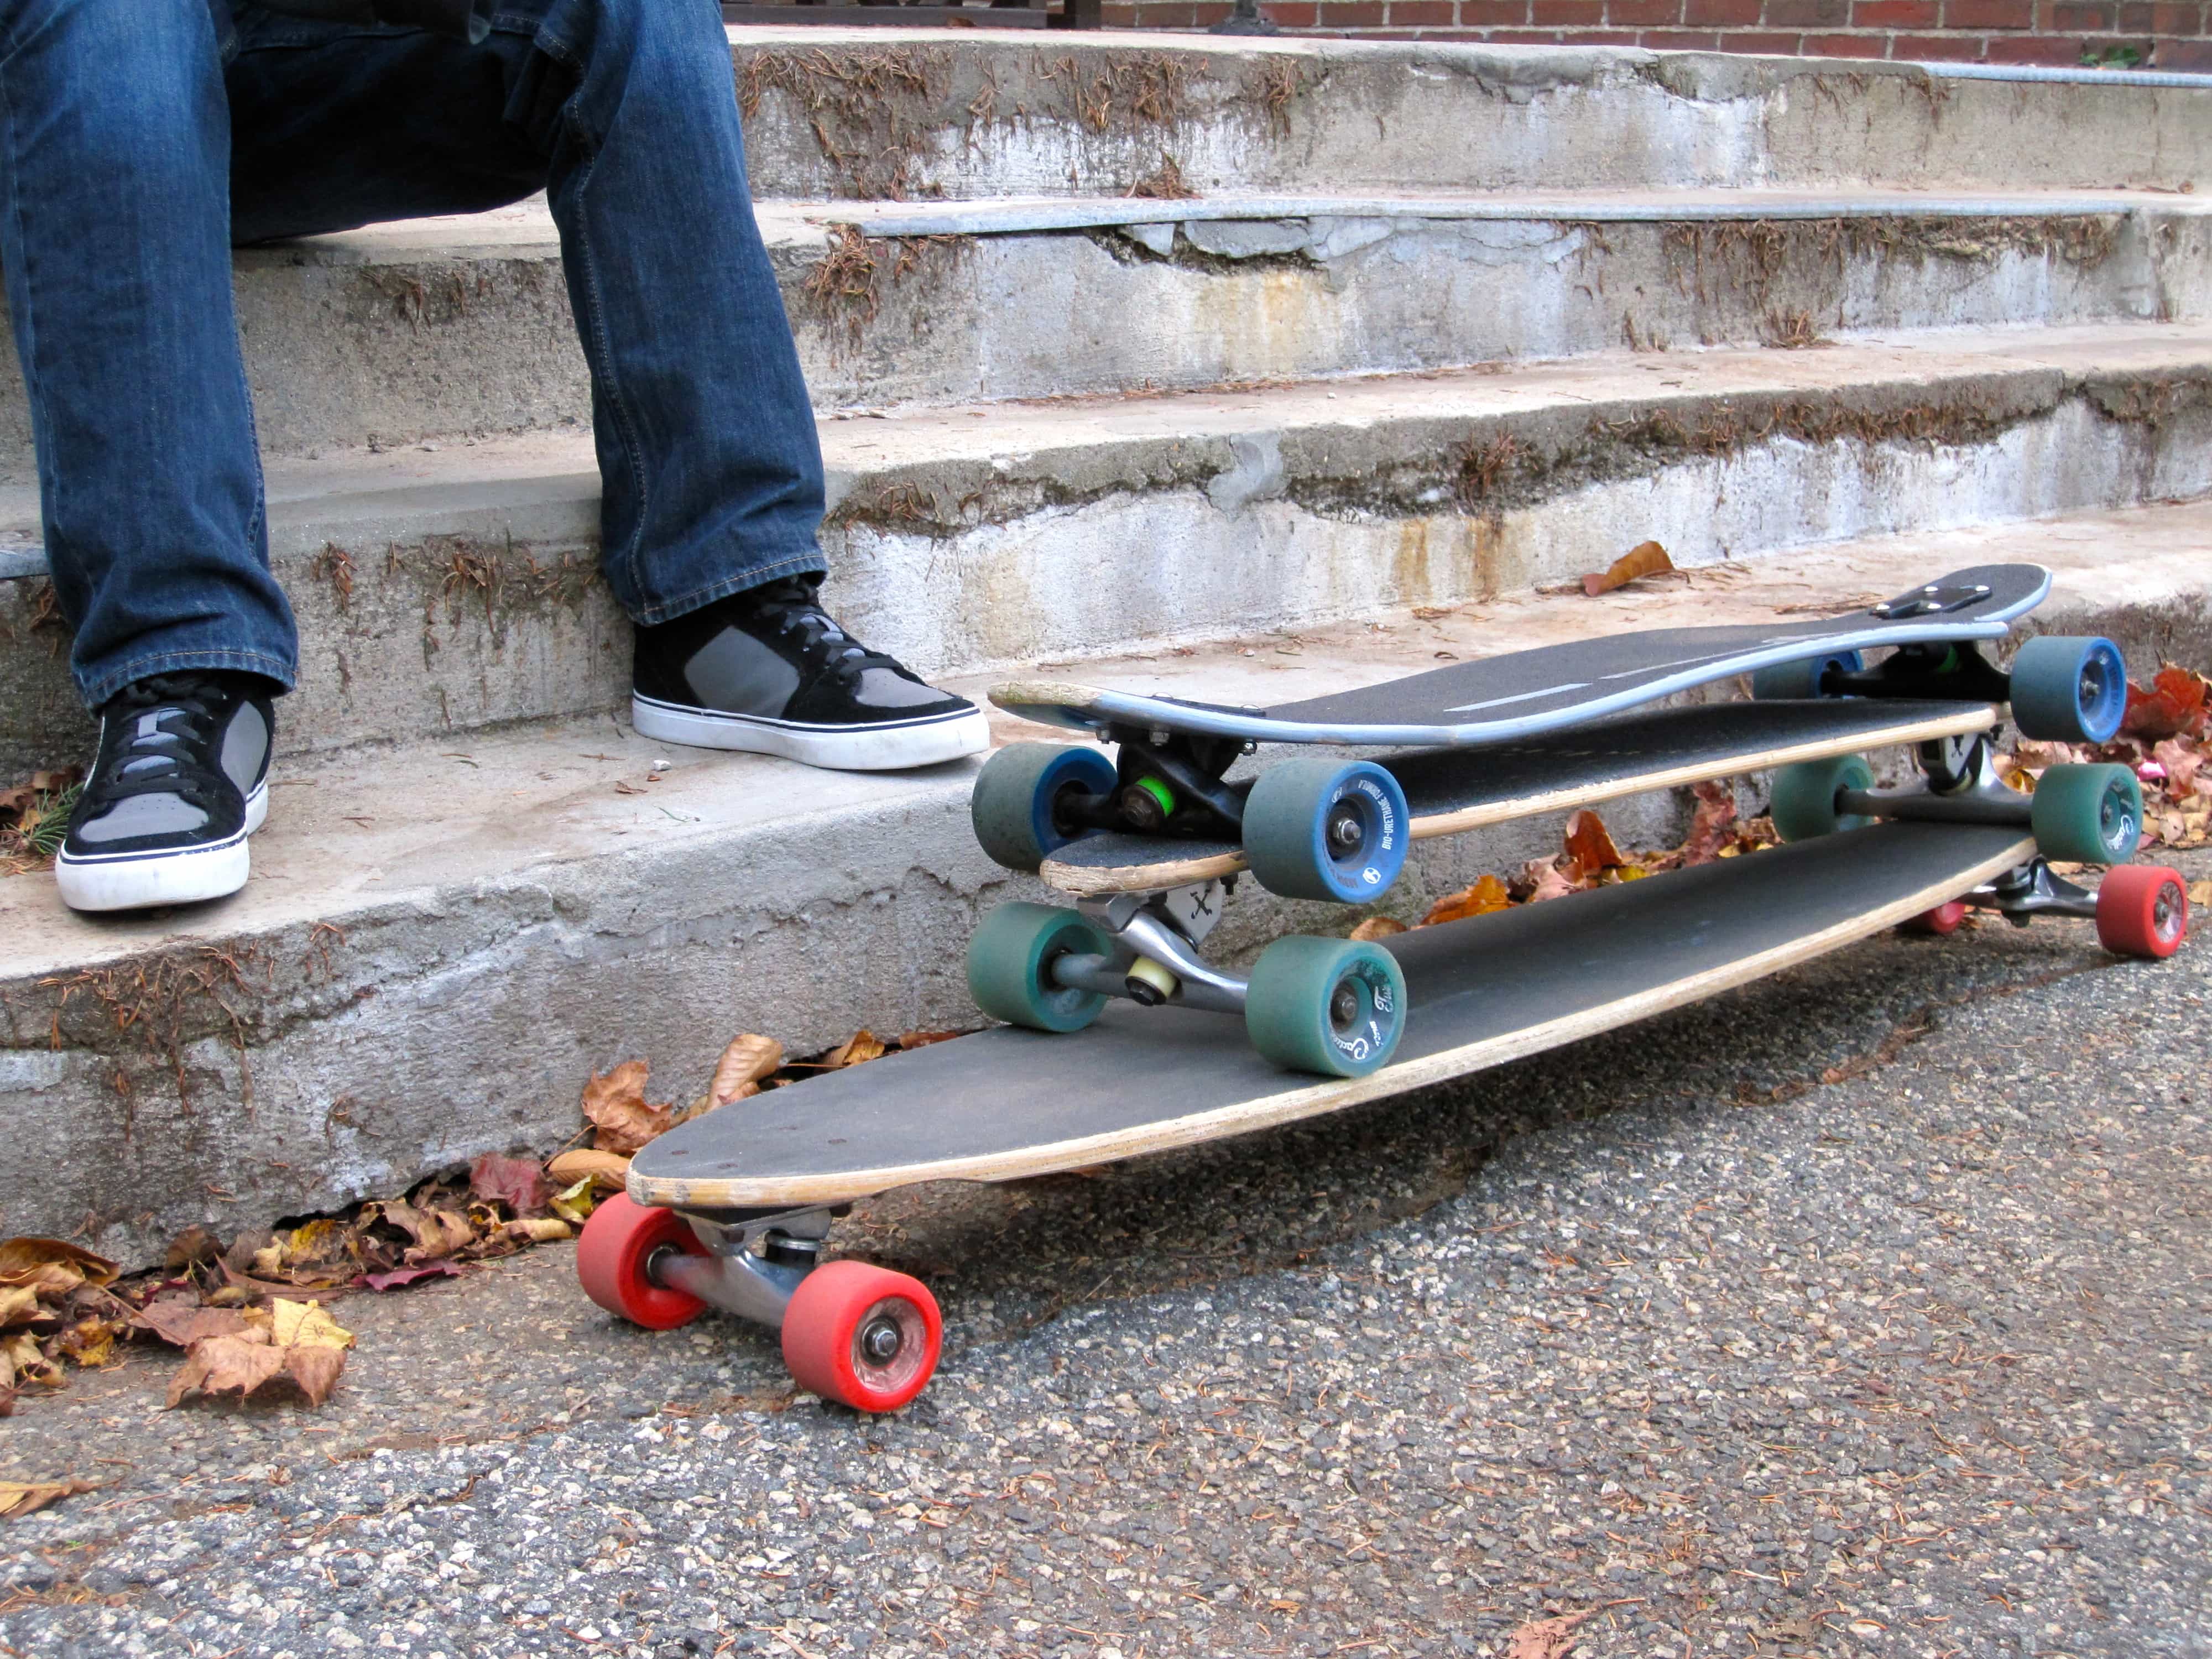 Longboard vs cruiser : what's the difference ?